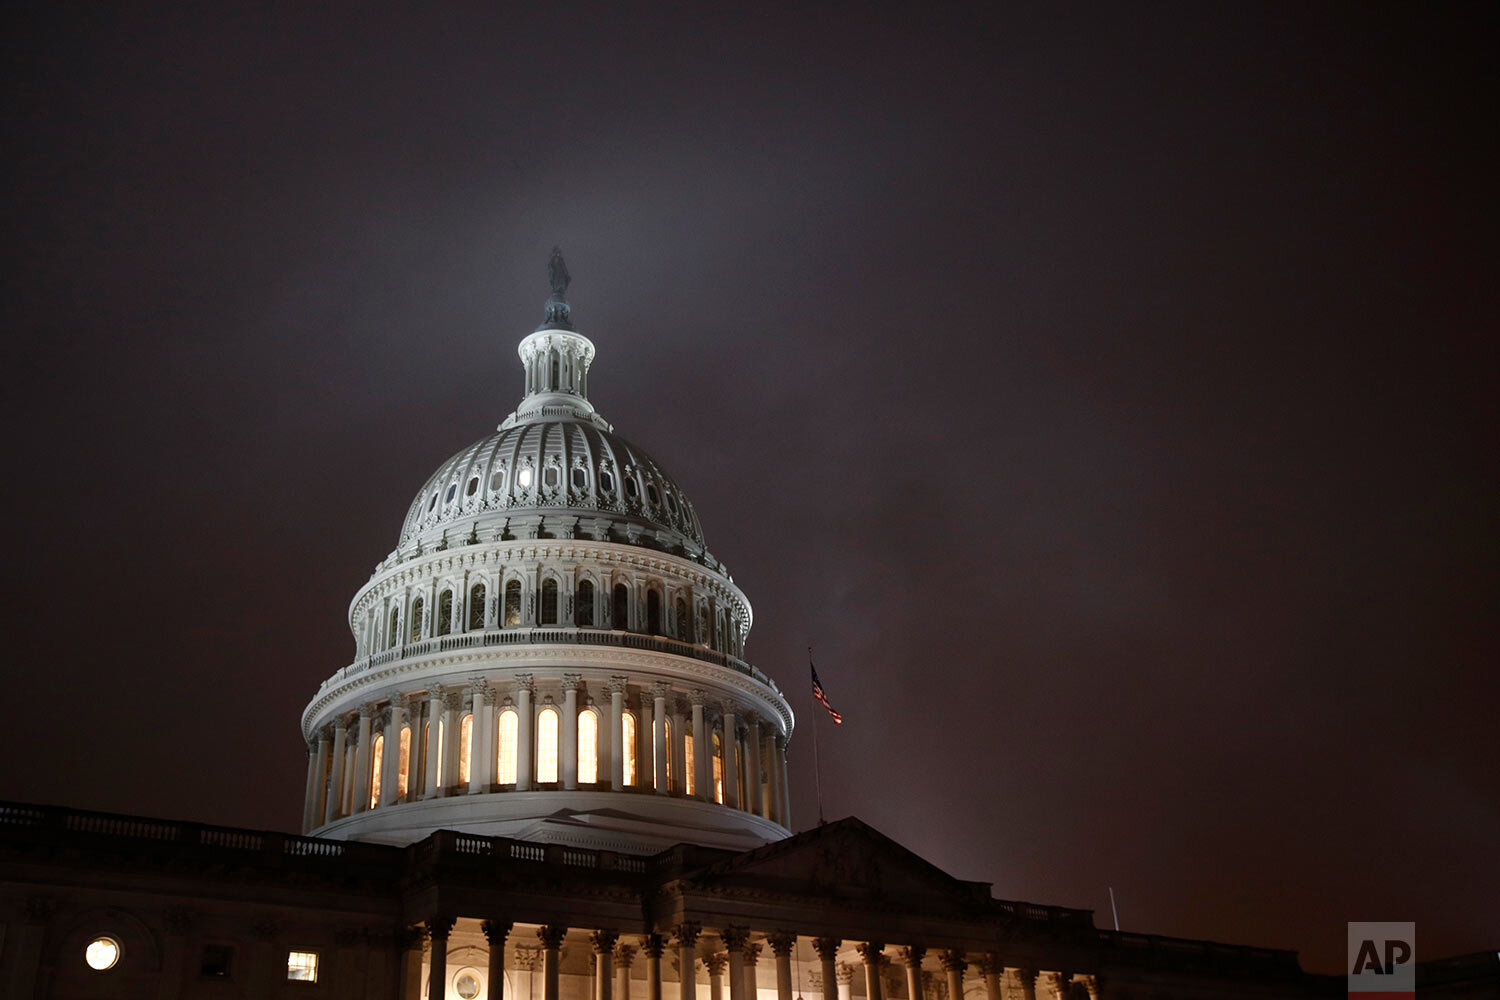  Mist rolls over the U.S. Capitol dome early Monday, Dec. 9, 2019, before a House Judiciary Committee hearing regarding the impeachment inquiry of President Donald Trump on Capitol Hill in Washington. (AP Photo/Patrick Semansky) 